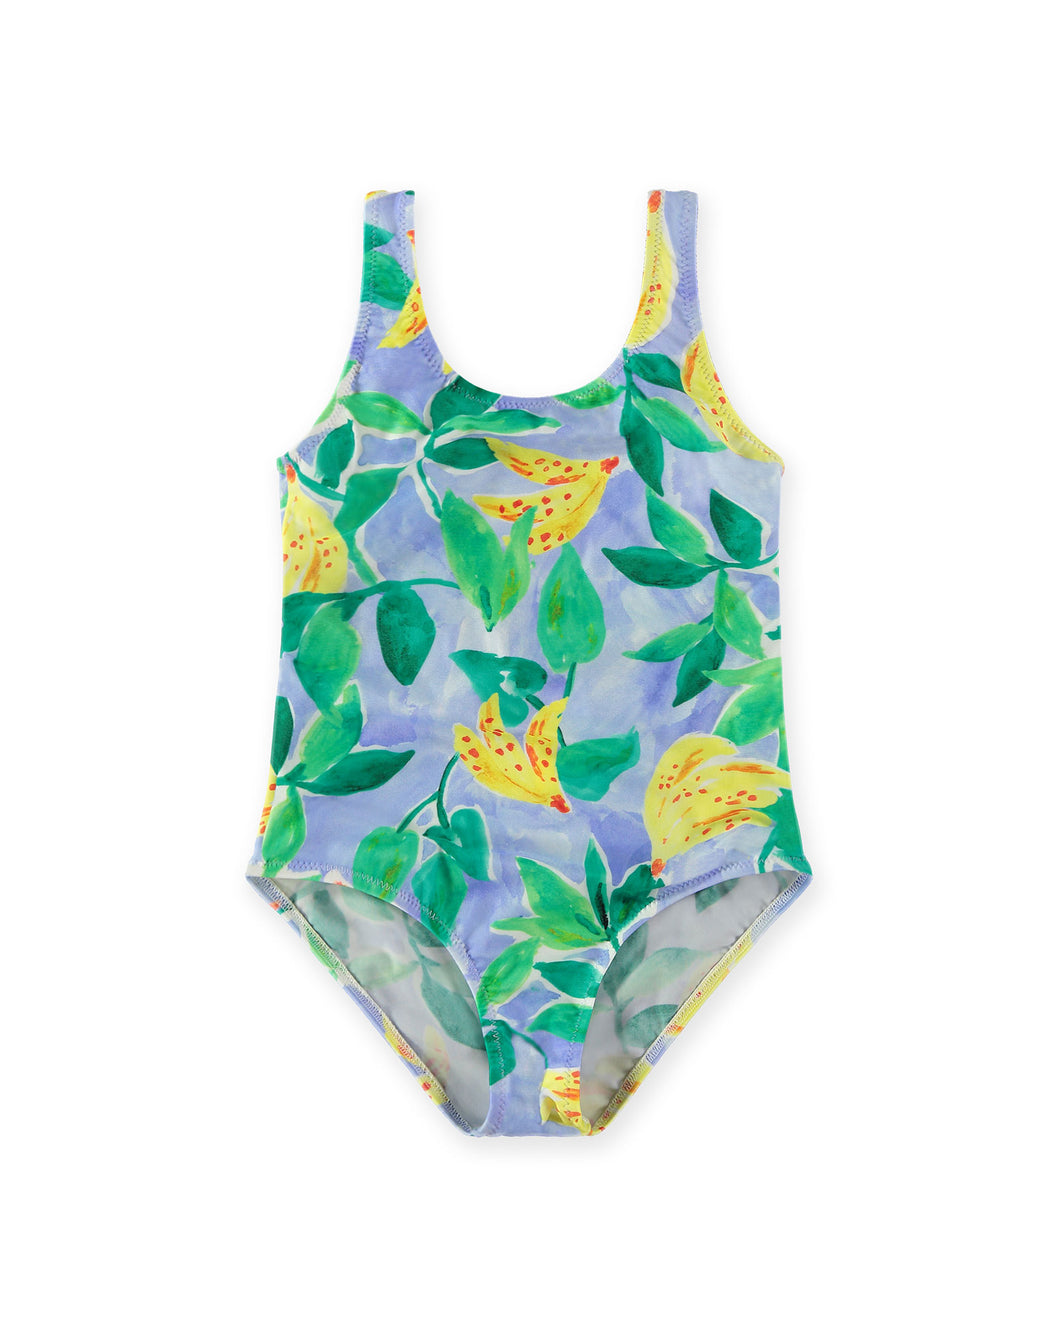 PAN CON CHOCOLATE AURORA SWIMSUIT V23AIA11175 SS23